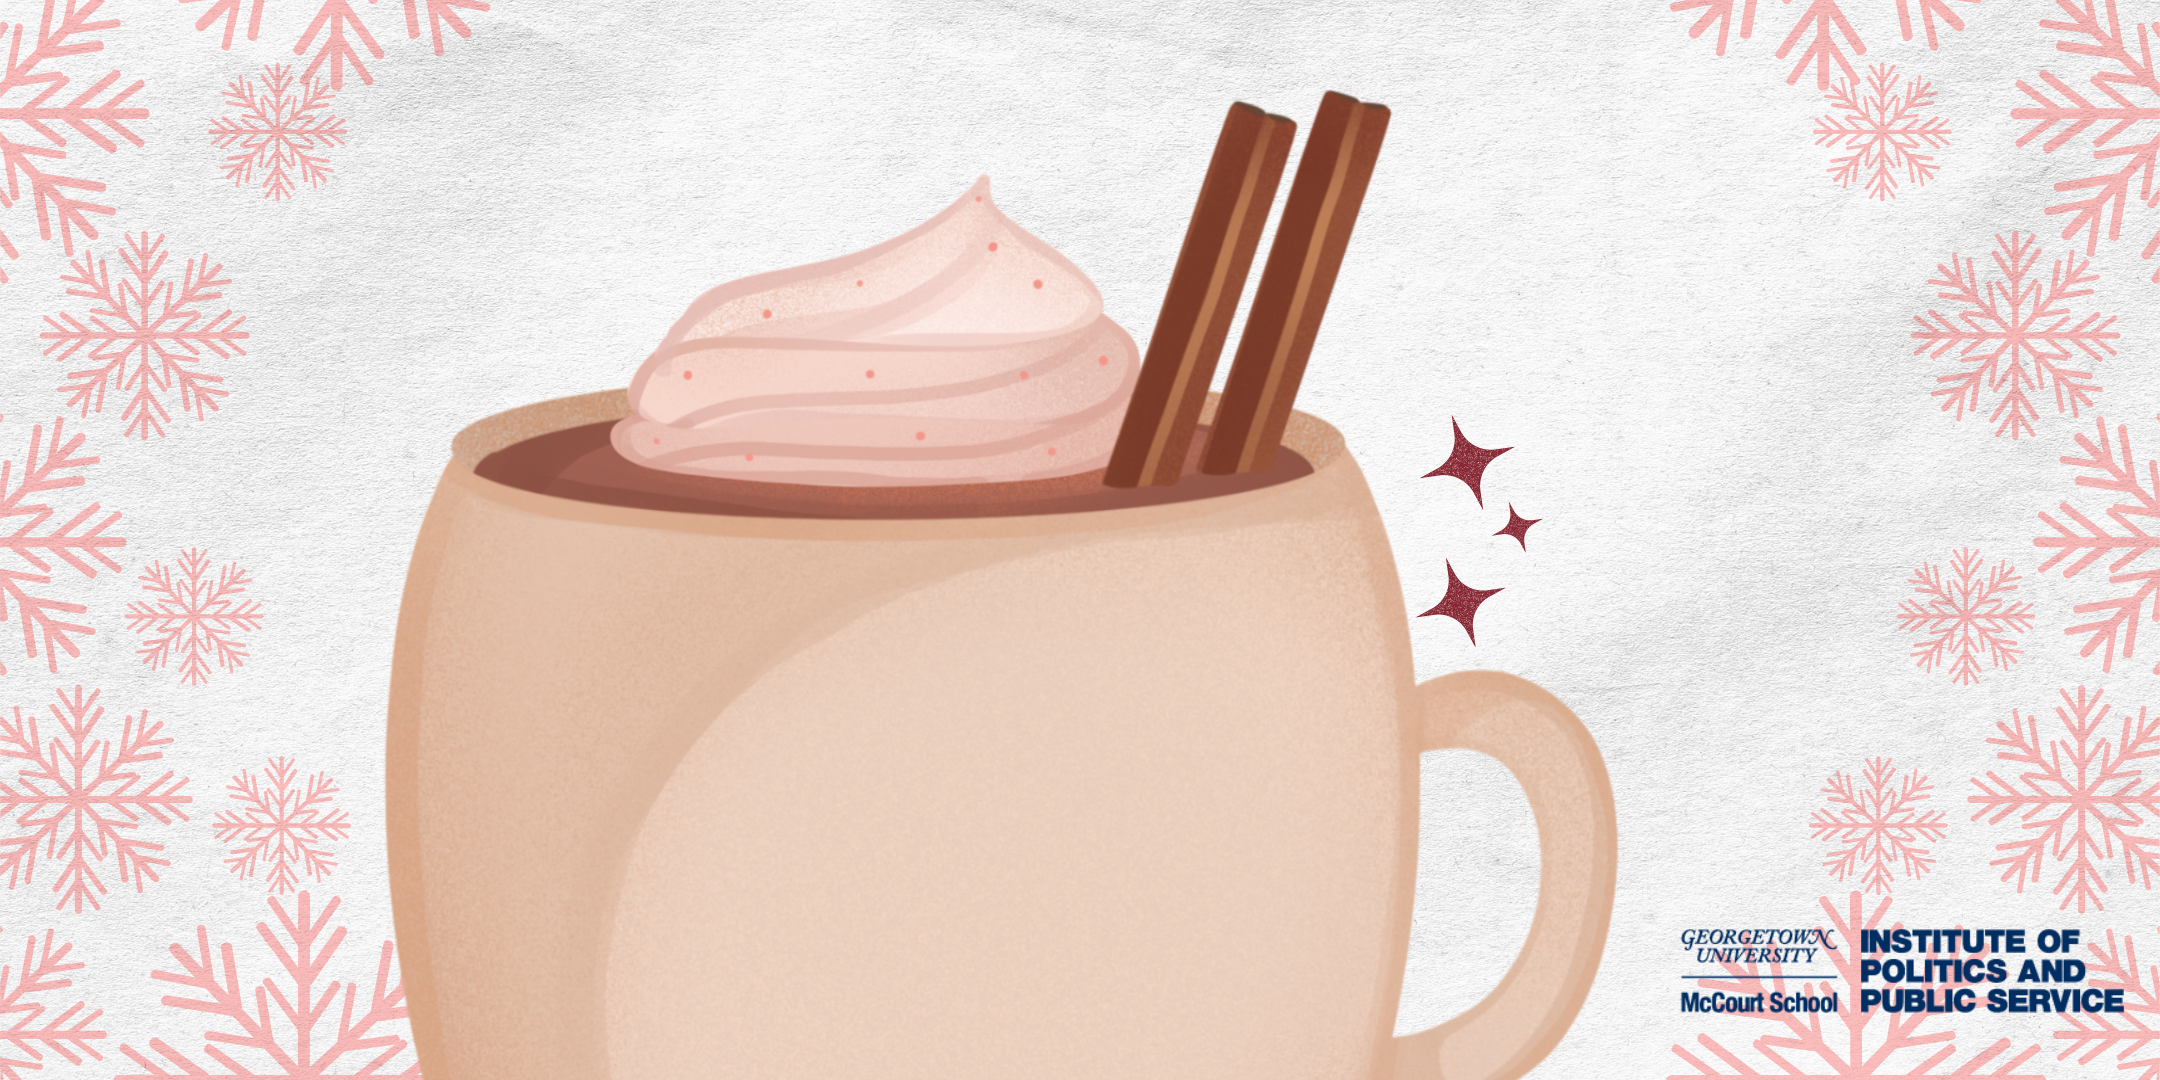 Illustration of a cup of hot chocolate with whipped cream and cinnamon sticks.